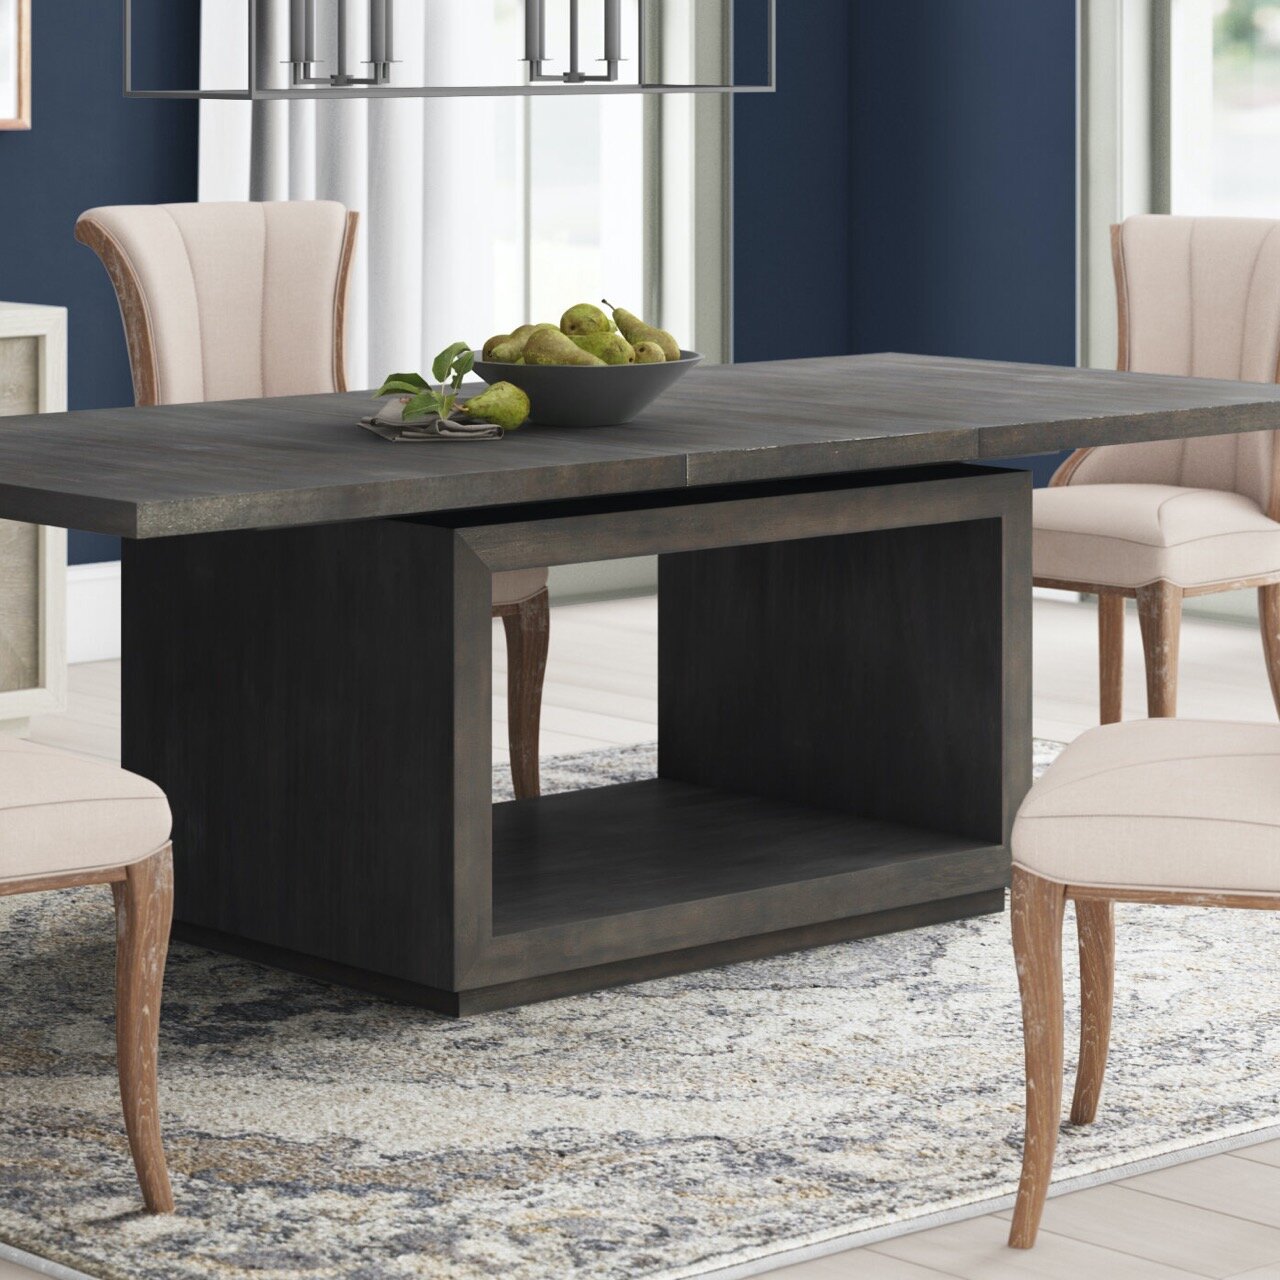 Matching Dining Tables & Sets